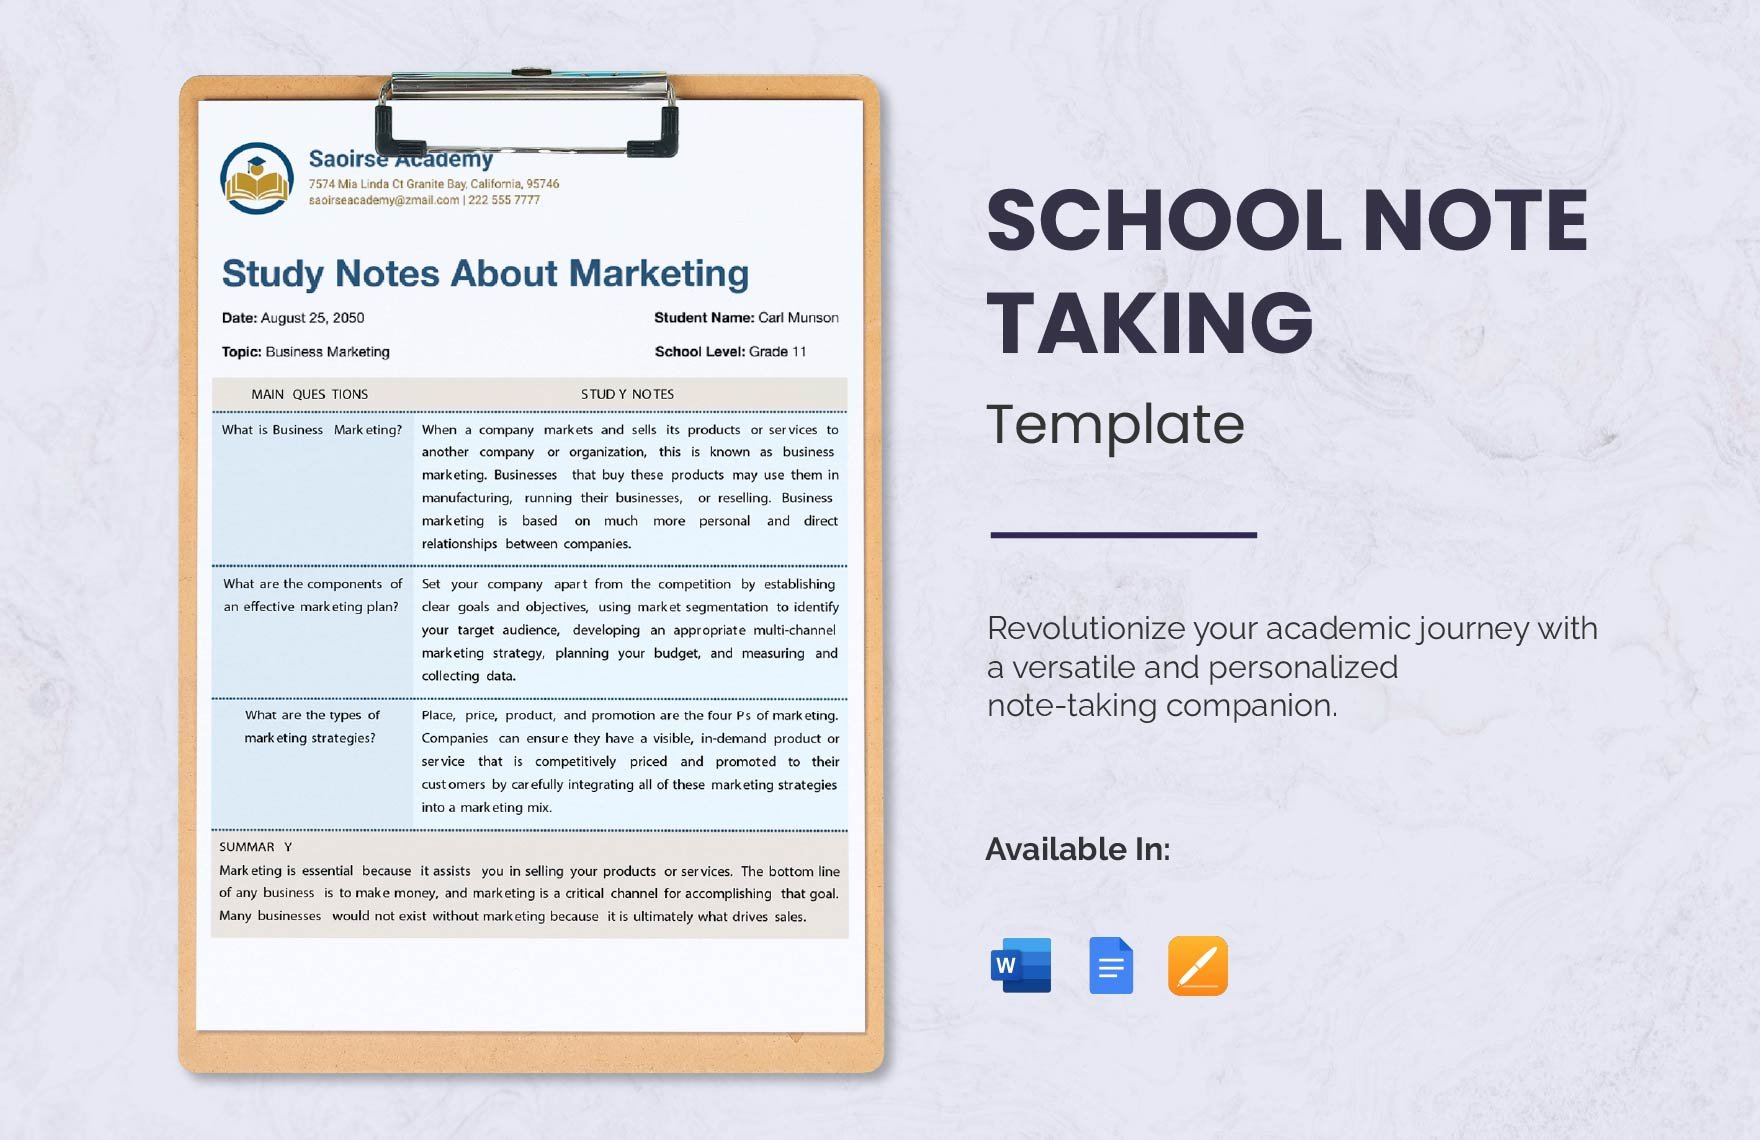 School Note Taking Template in Word, Google Docs, PDF, Apple Pages